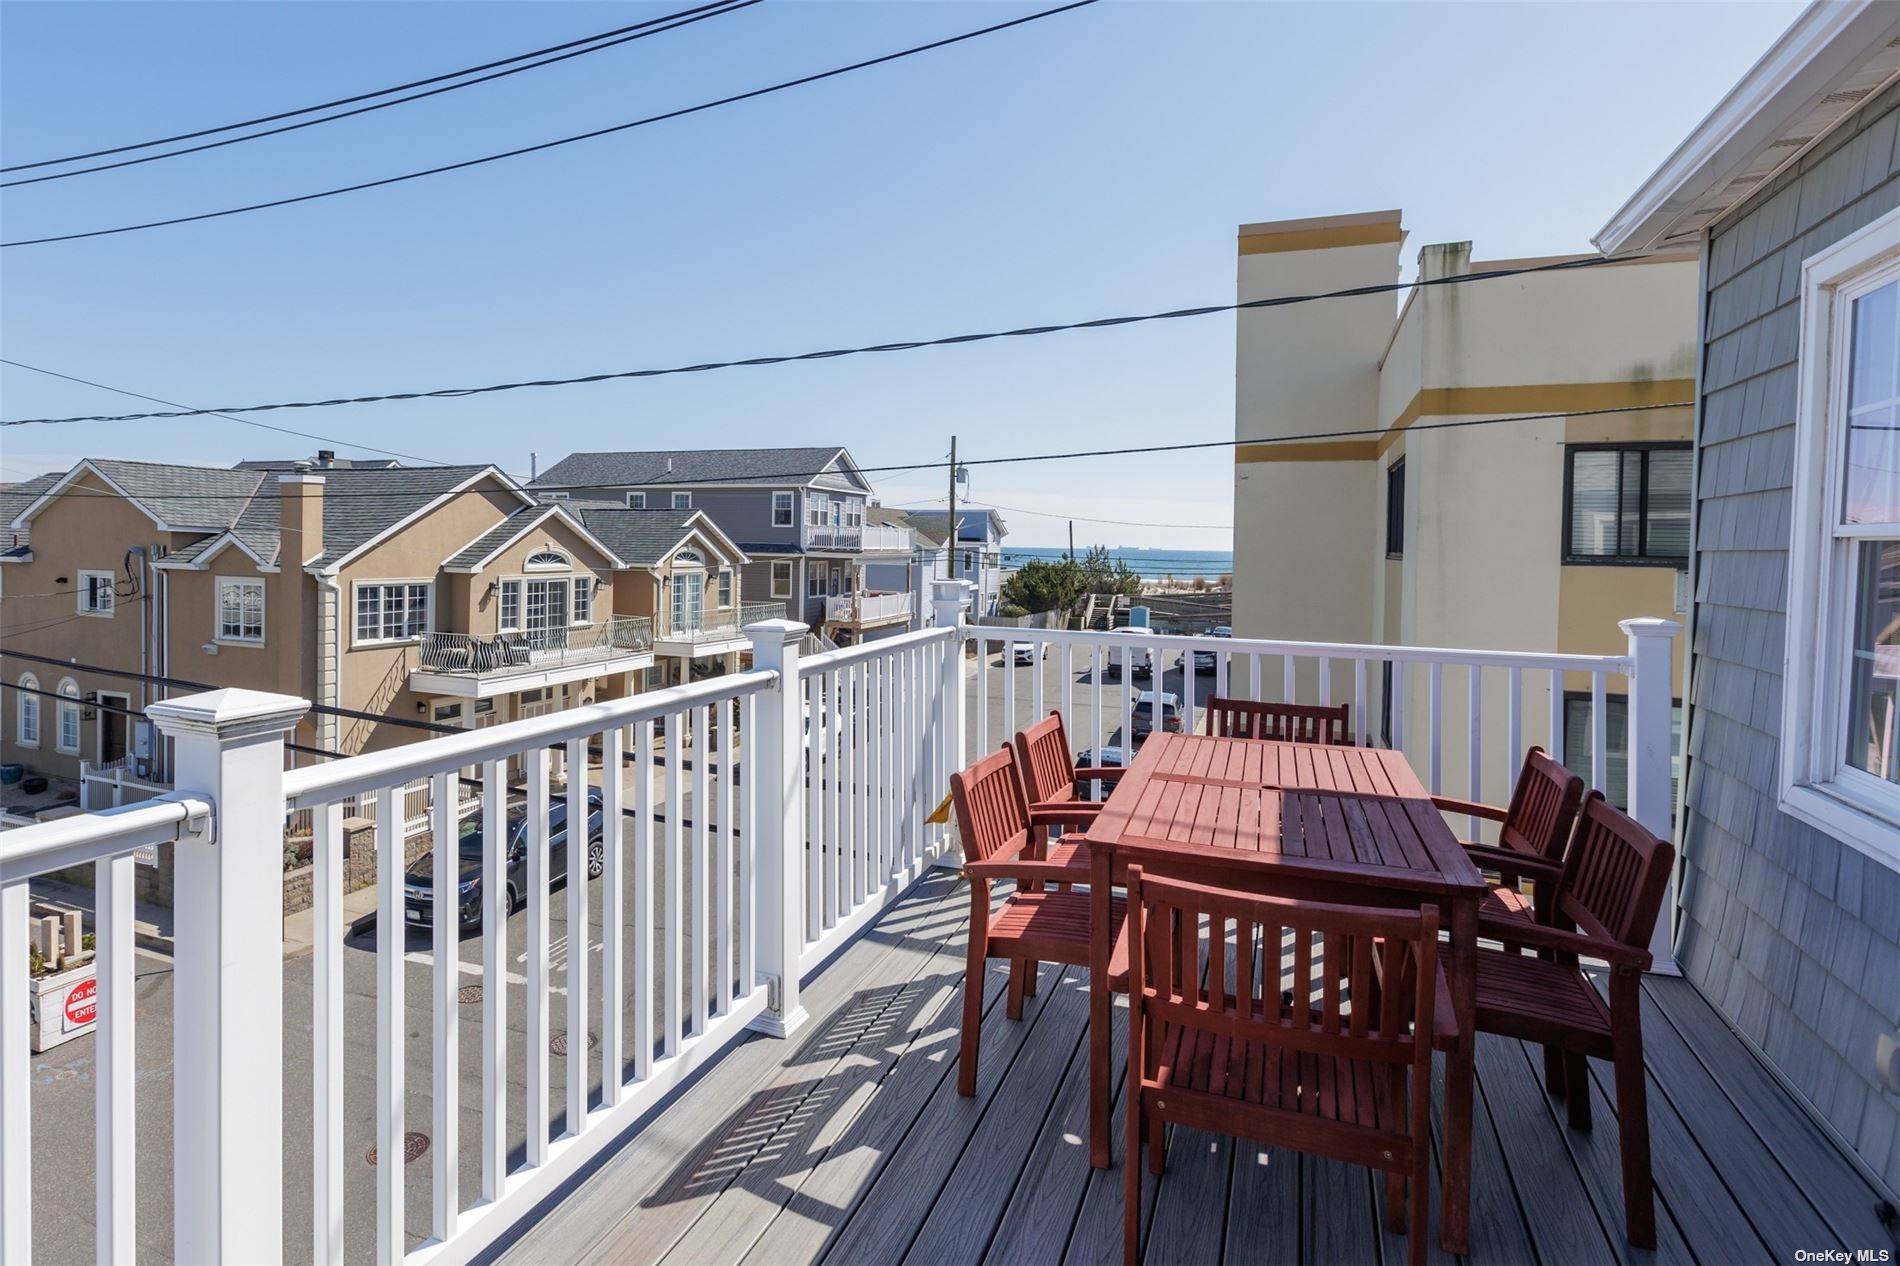 SUNDRENCHED UPDATED 3 BEDROOM, 2 BATH OCEANVIEW WITH FRONT DECK 3 HOUSES FROM THE BEACH ENTRANCE ON A WIDE BLOCK.